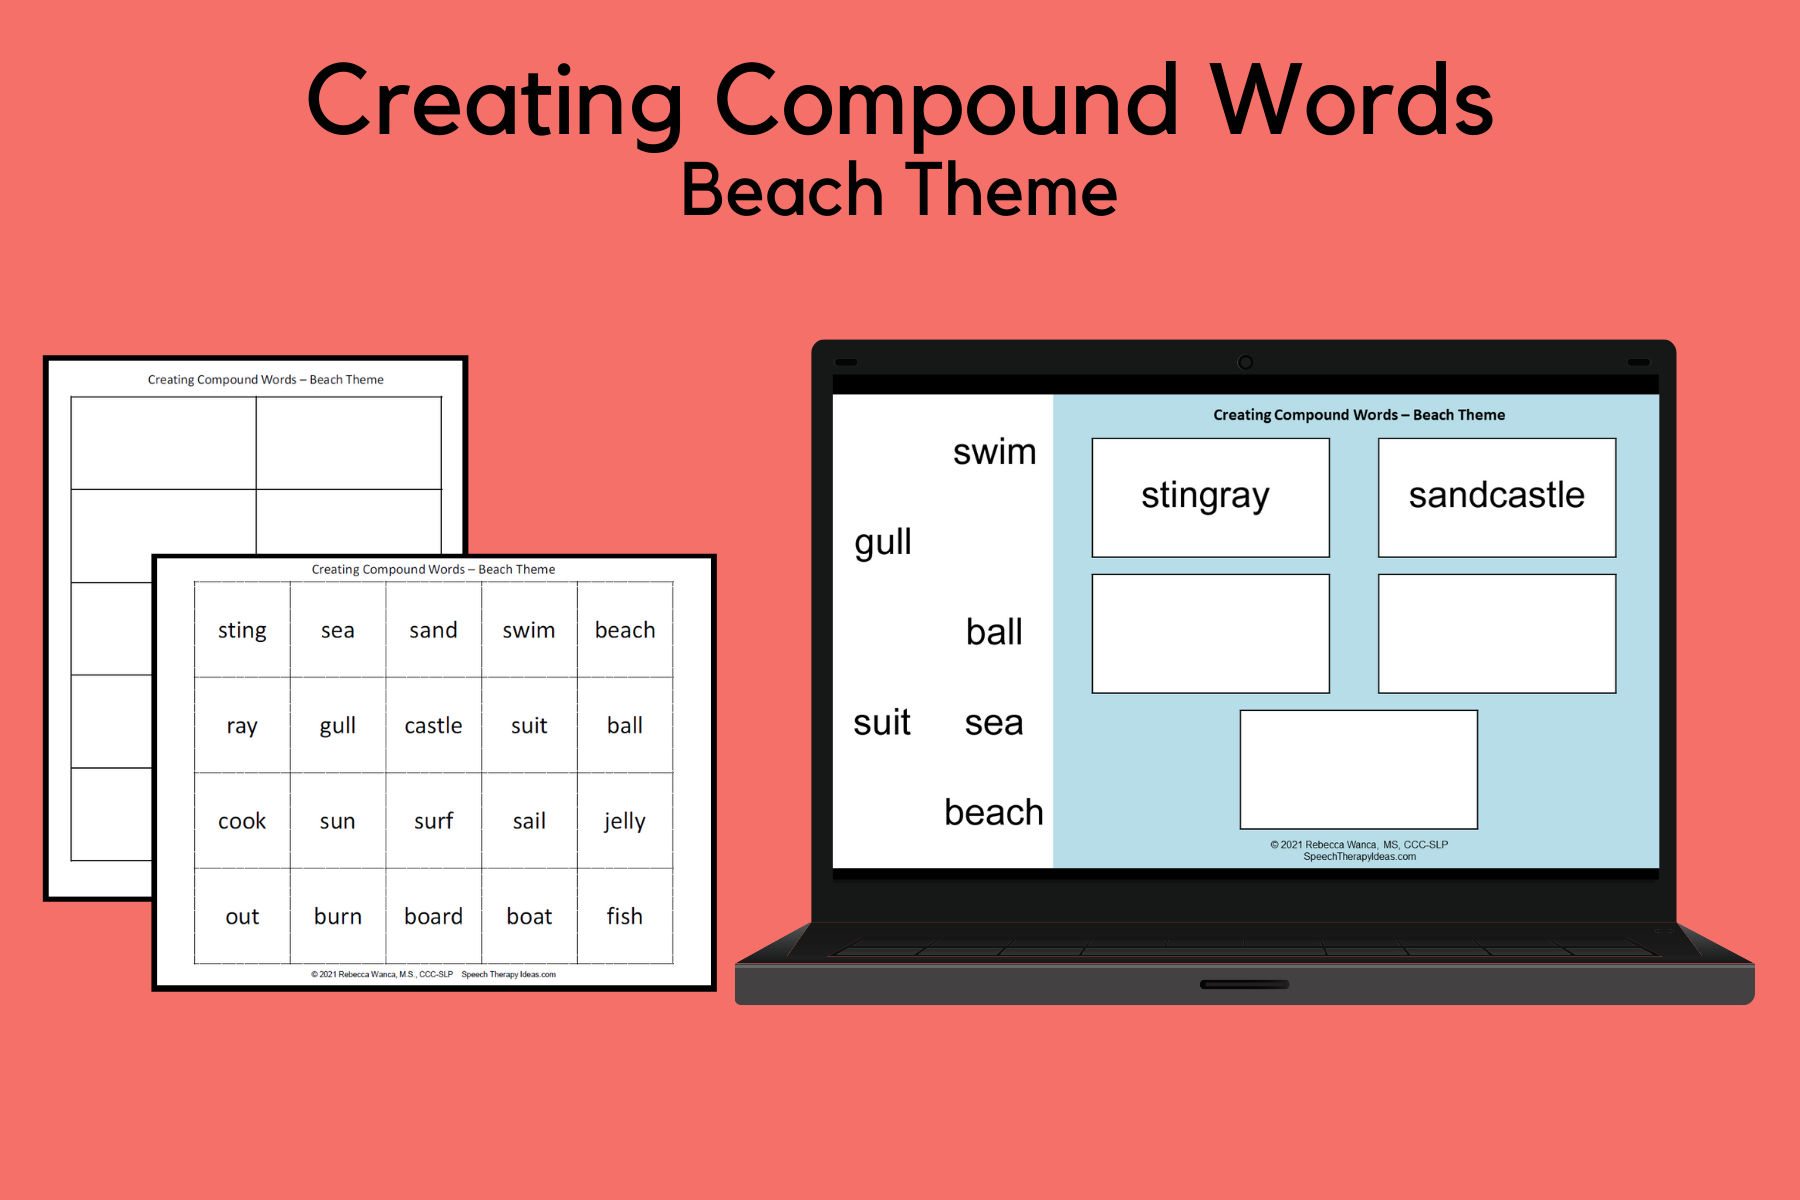 Creating Compound Words – Beach Theme